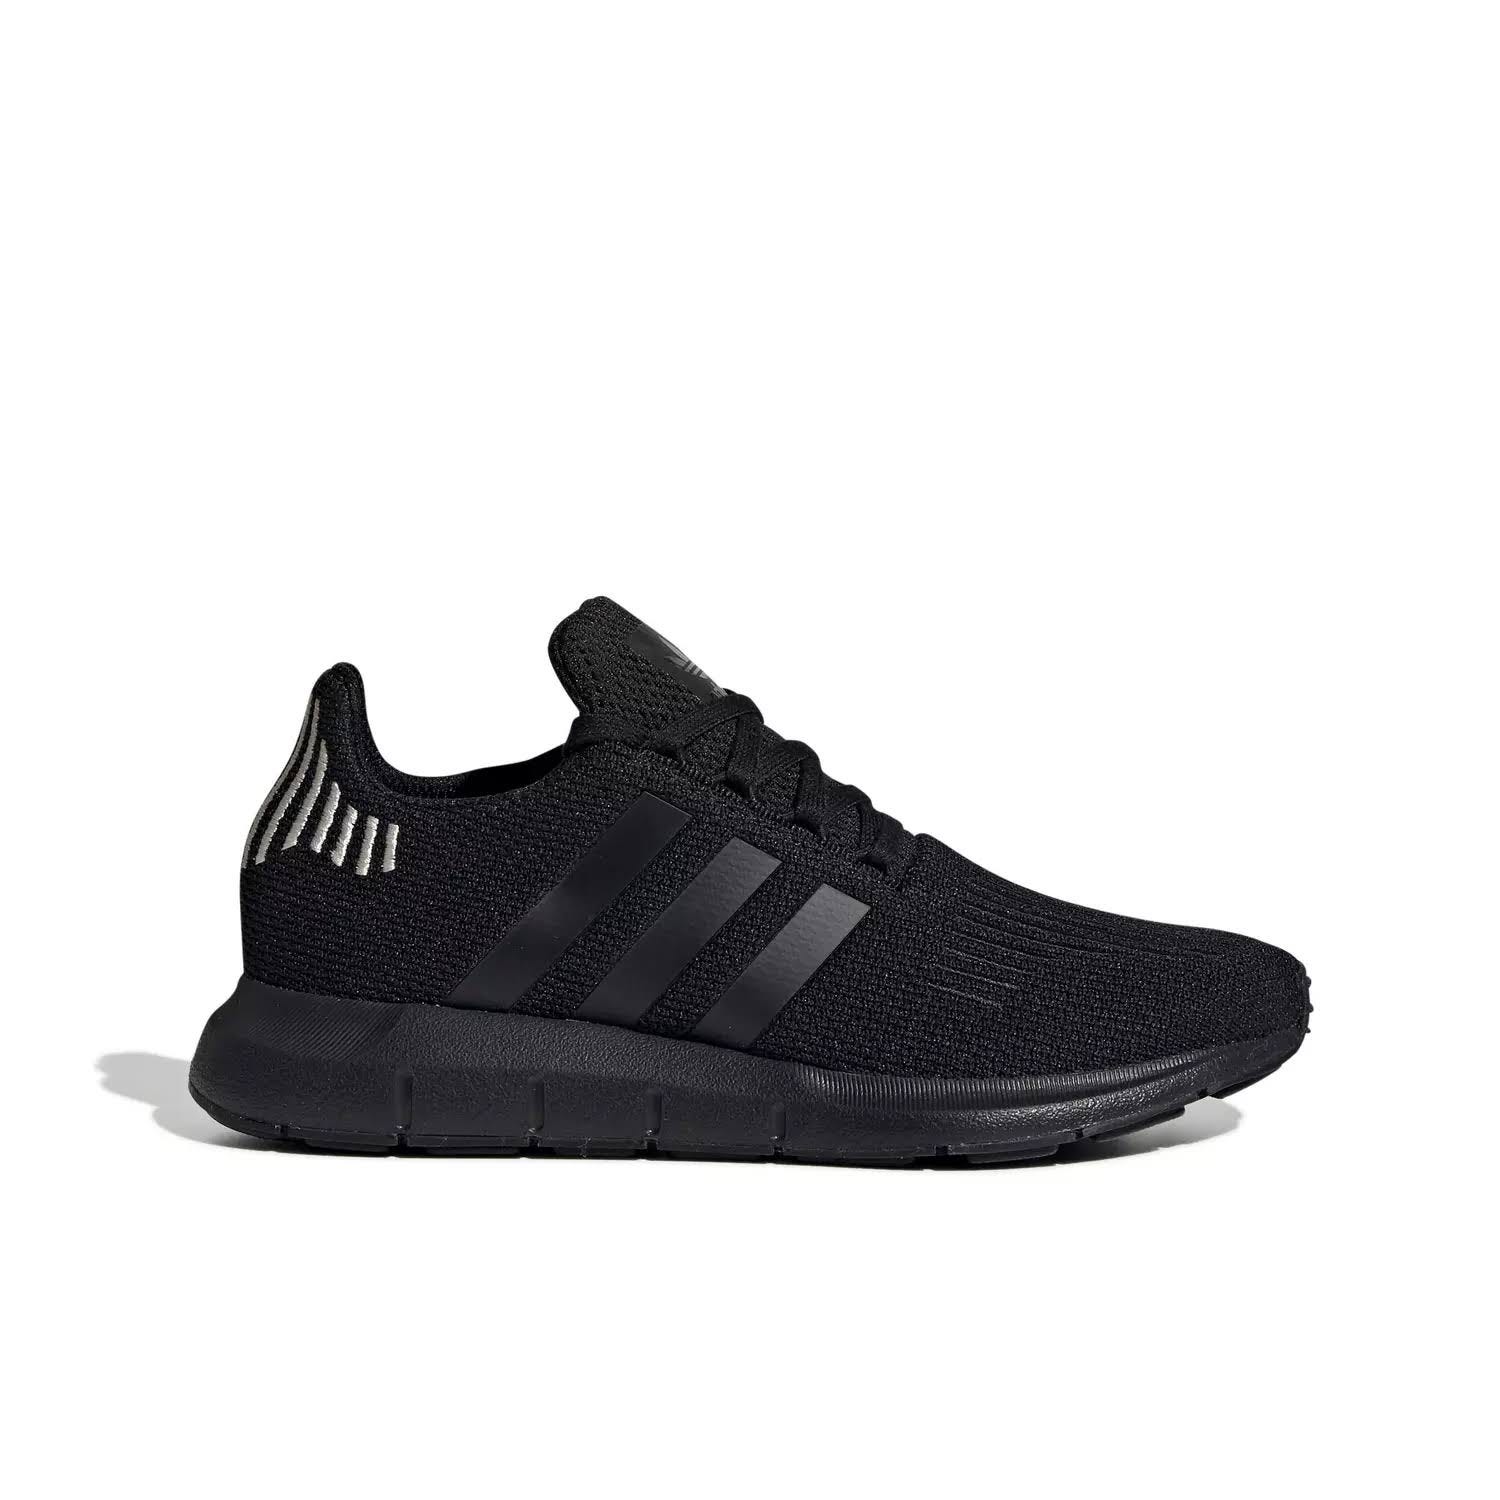 Adidas Originals Black Swift Run Shoes: Stylish and Comfortable Casual Sneakers for Women | Image